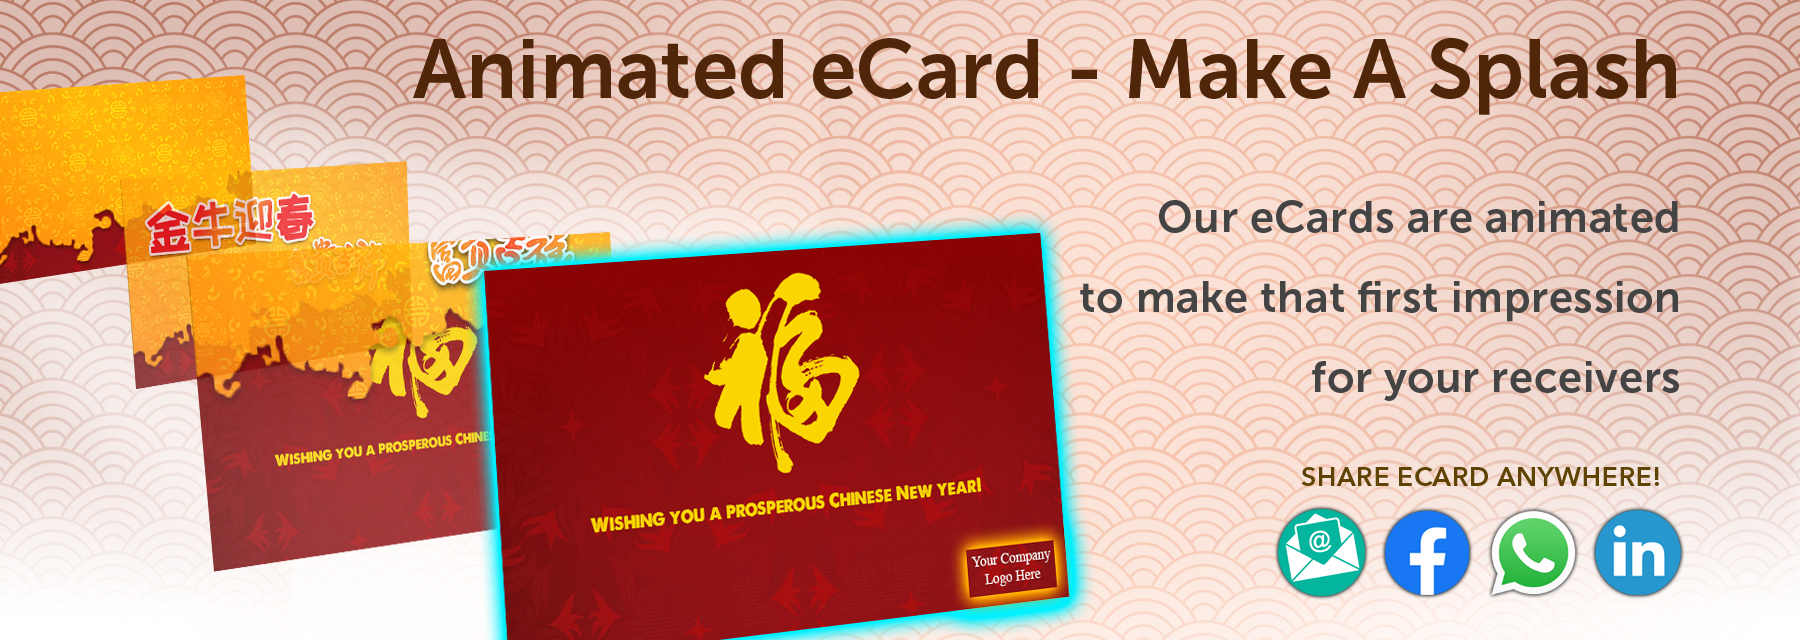 Chinese New Year Corporate E-Greeting Cards